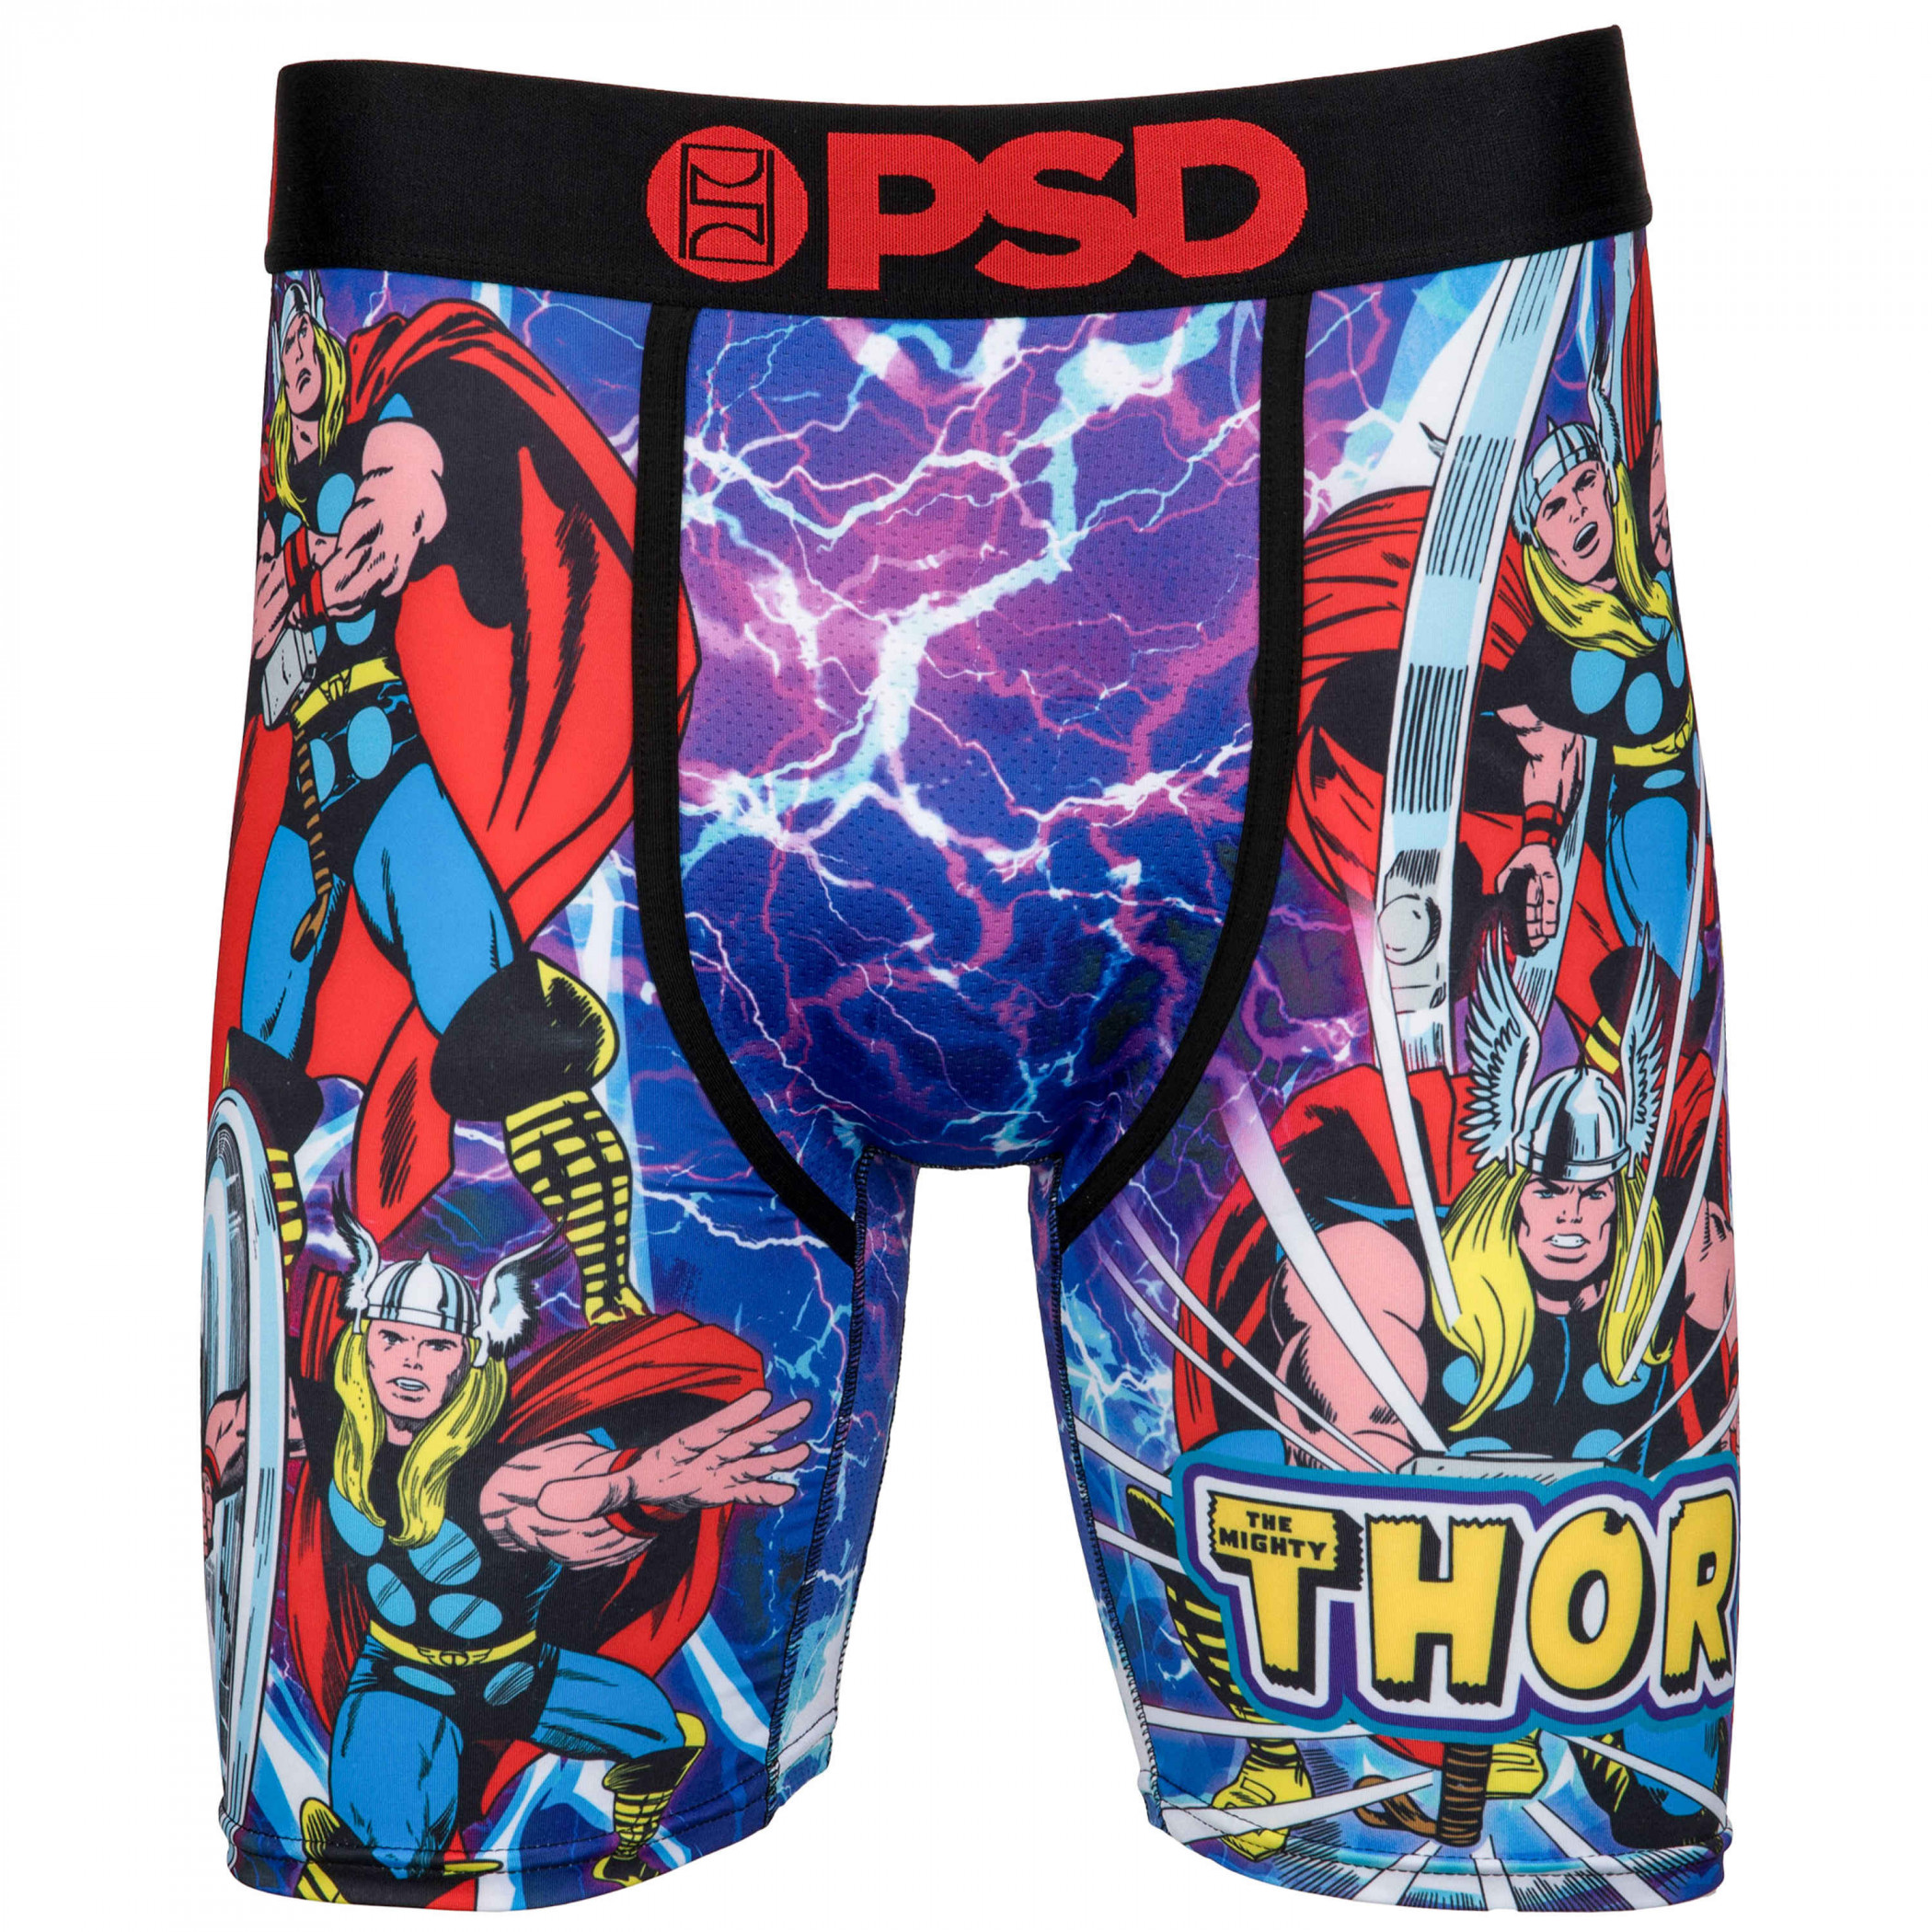 Marvel Avengers Collage 3-Pack PSD Boxer Briefs